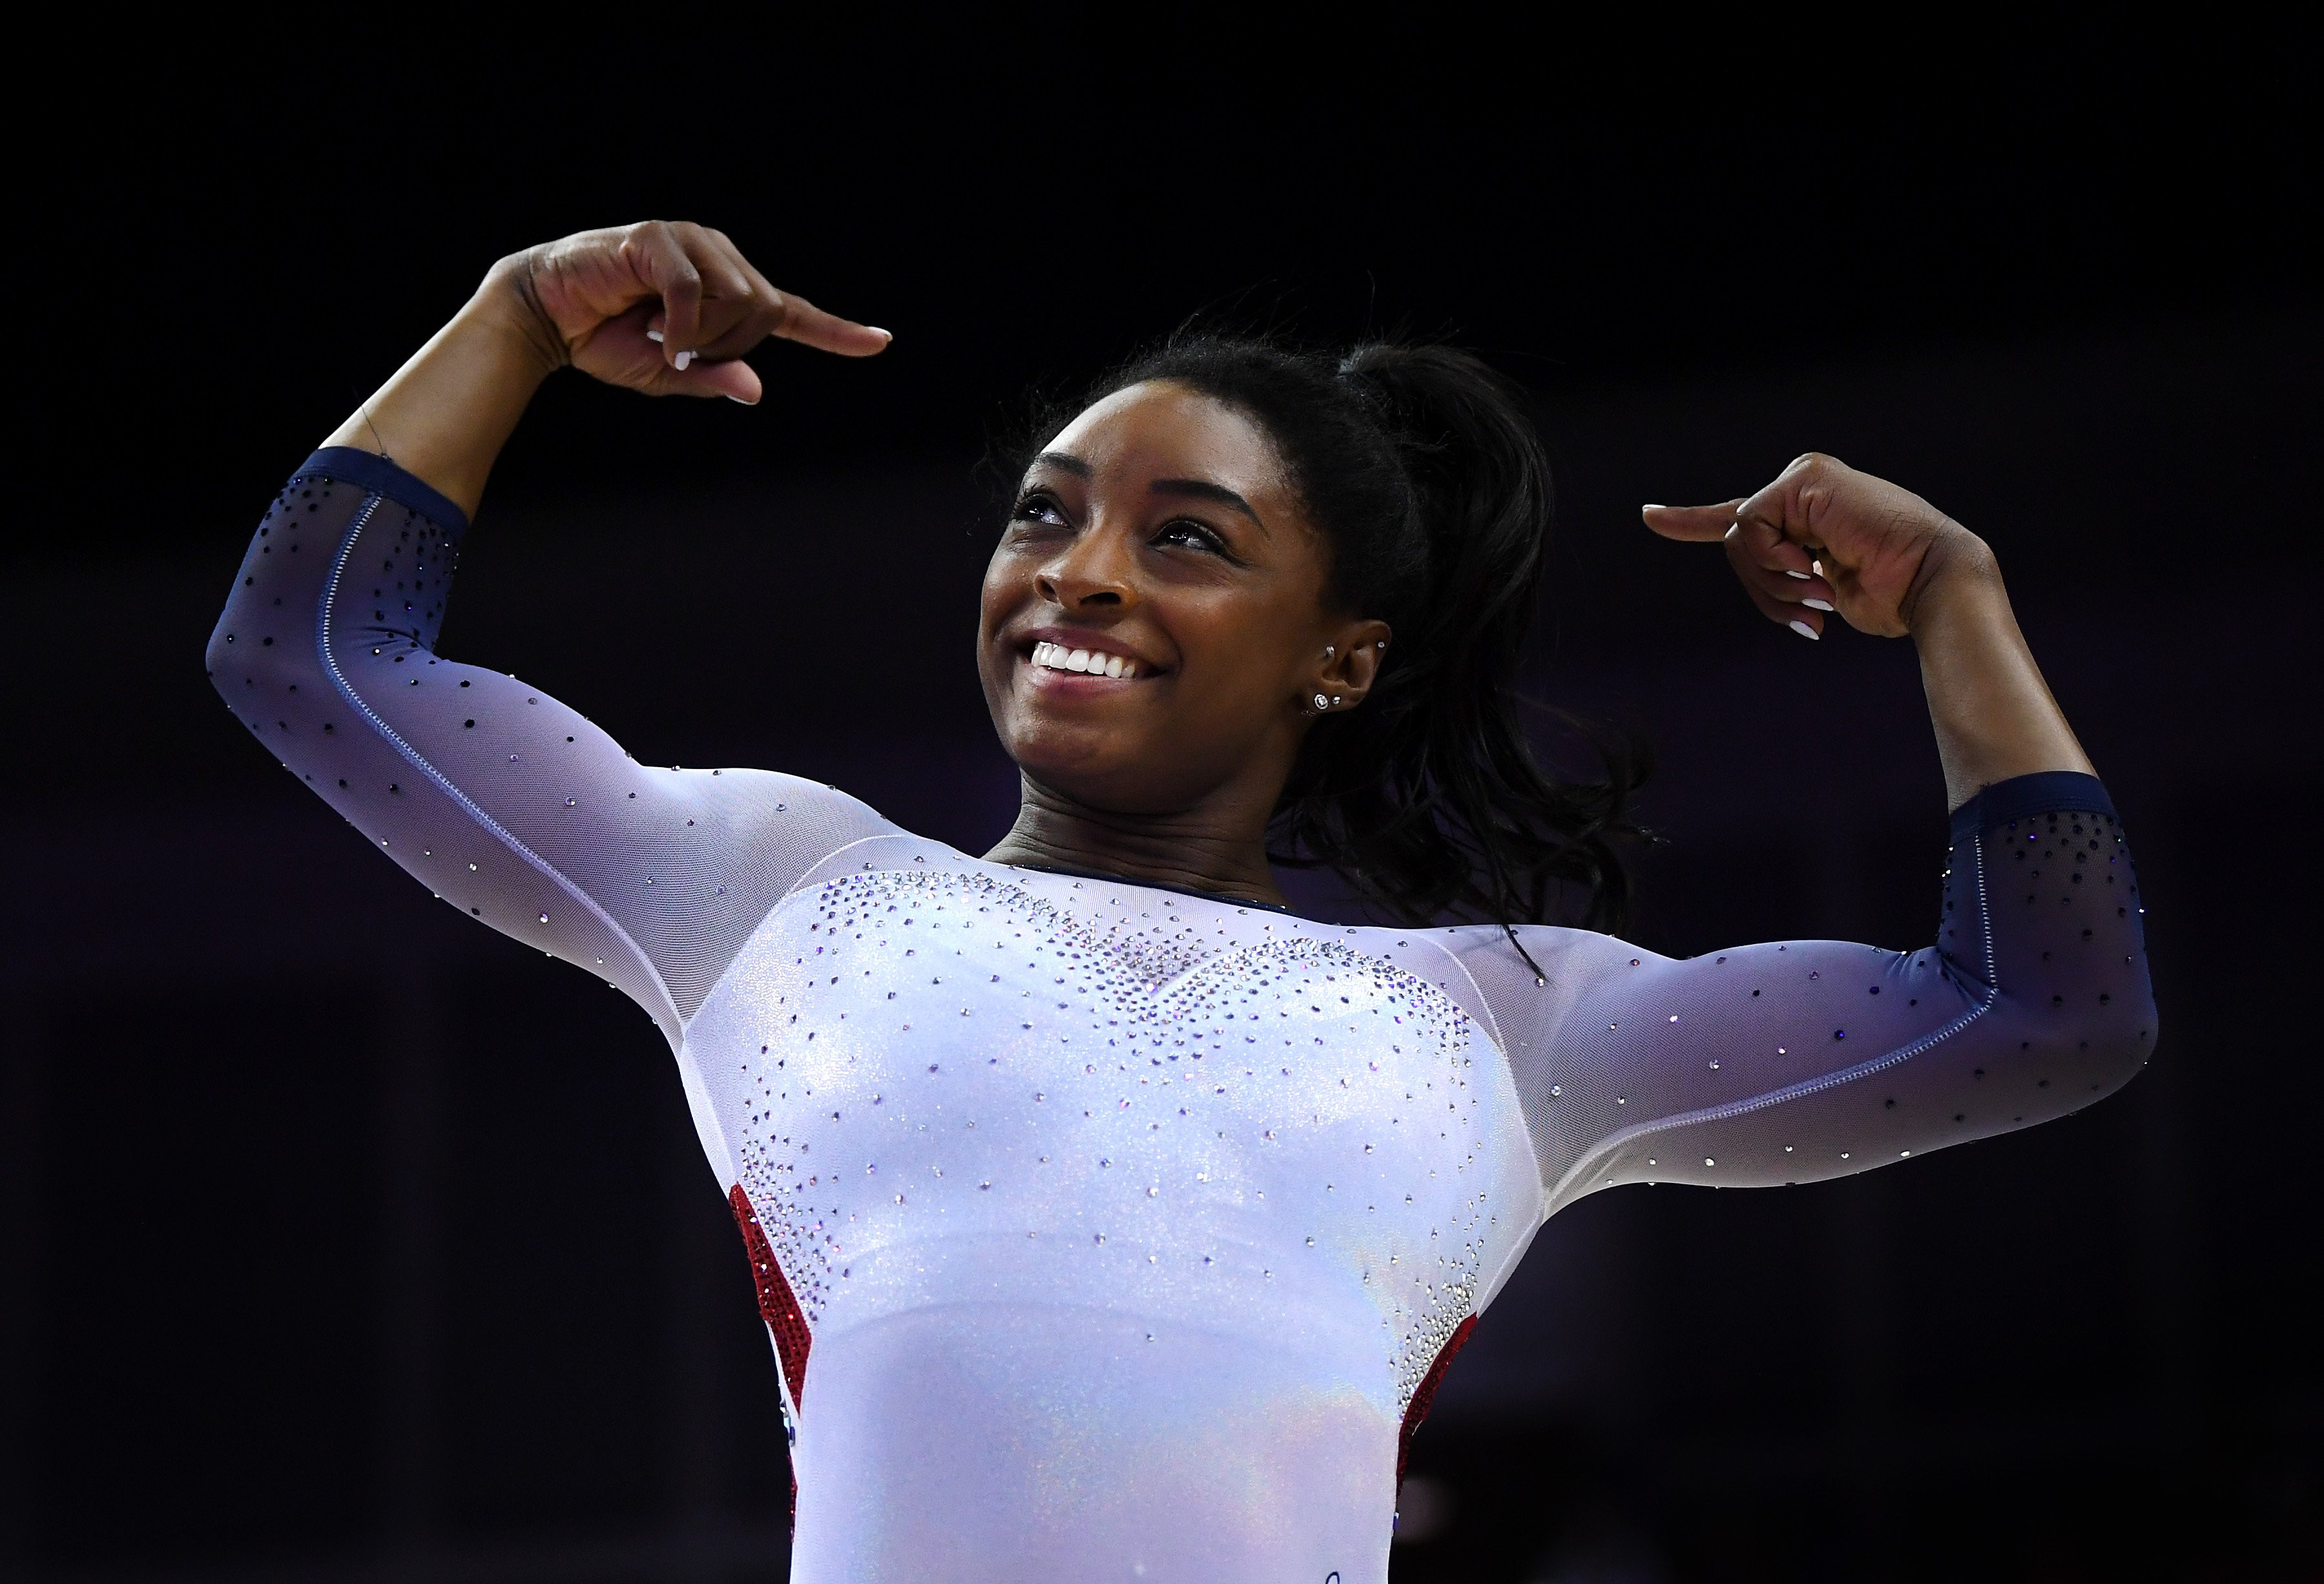 Simone Biles during her performance at the Superstars of Gymnastics at The O2 Arena on March 23, 2019 in London, England.|Source: Getty Images